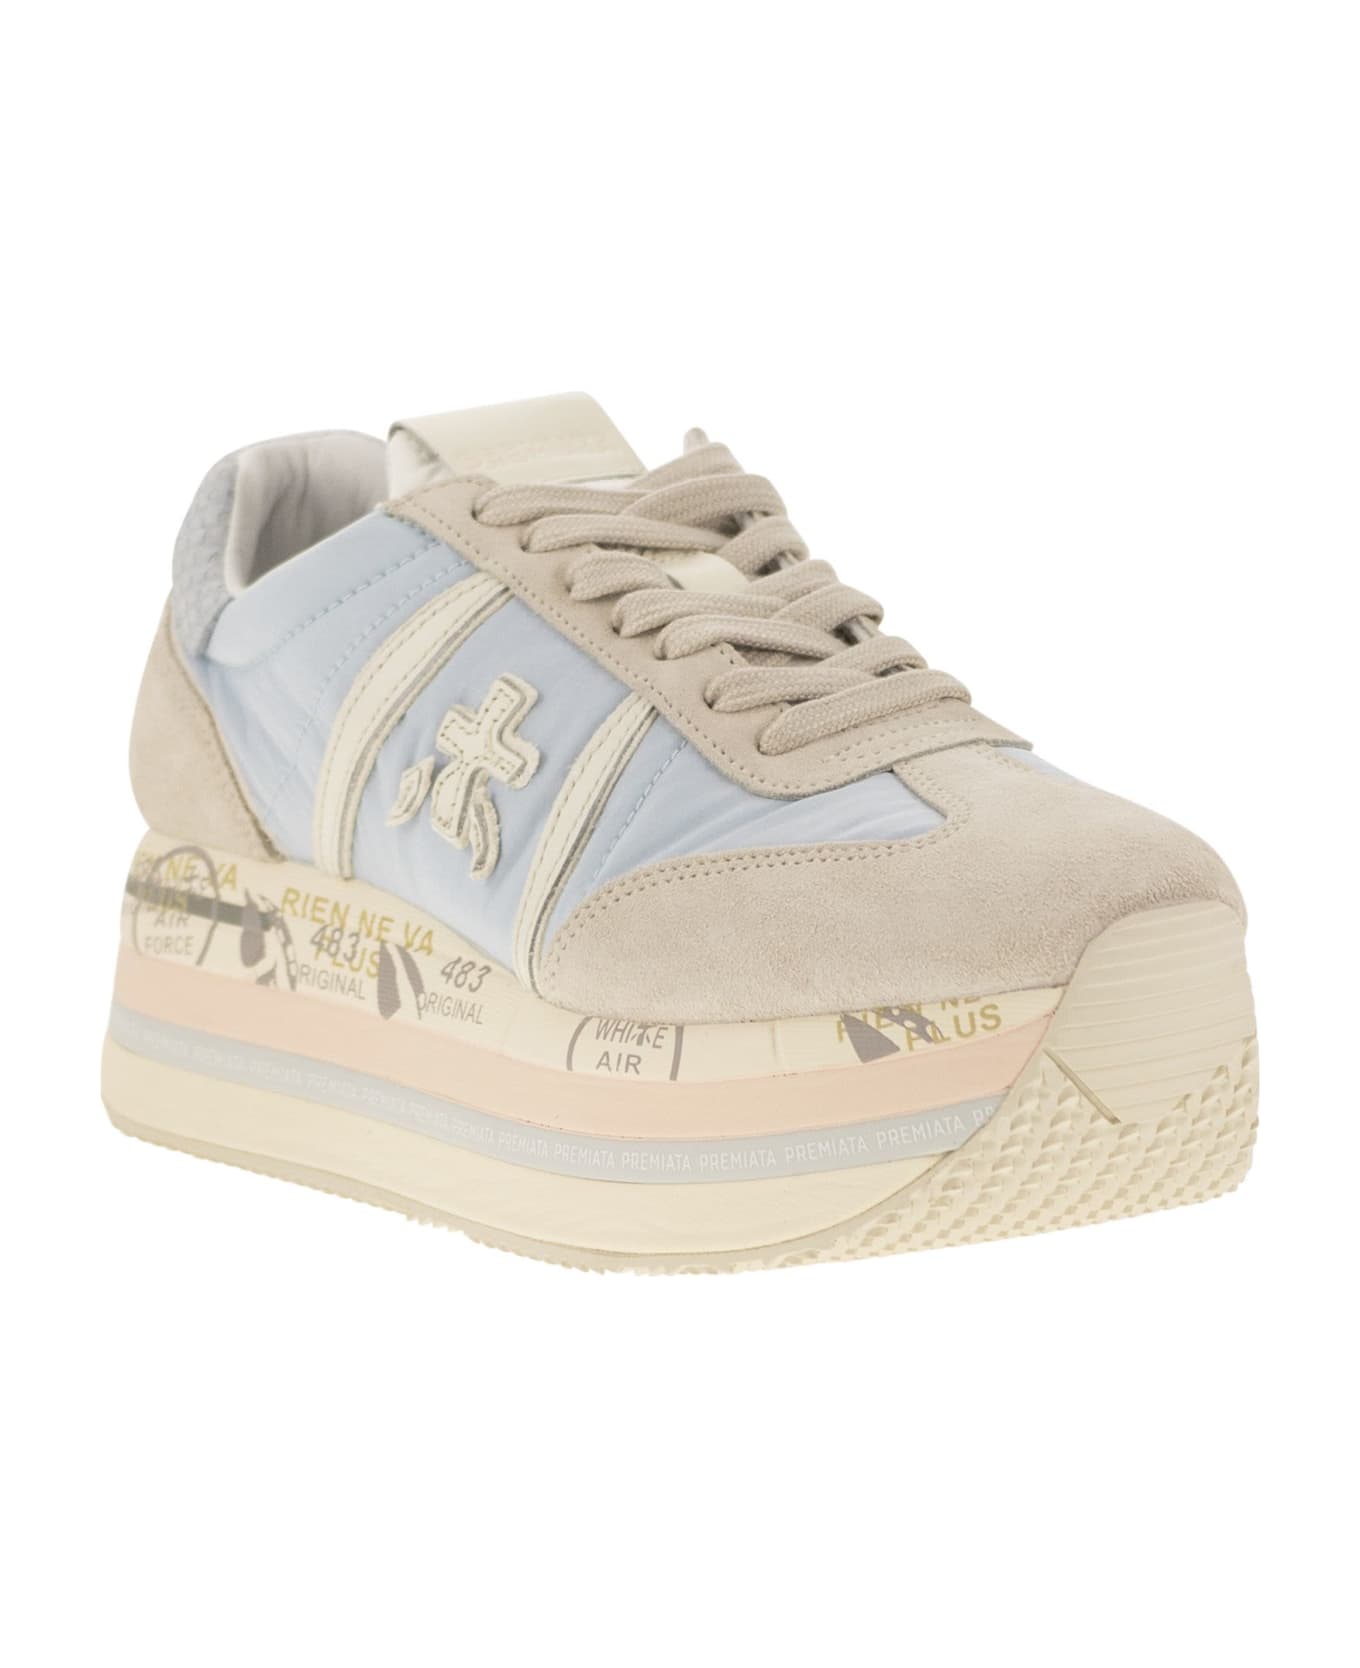 Premiata Beth Sneakers In Beige Suede And Fabric - White/light Blue スニーカー